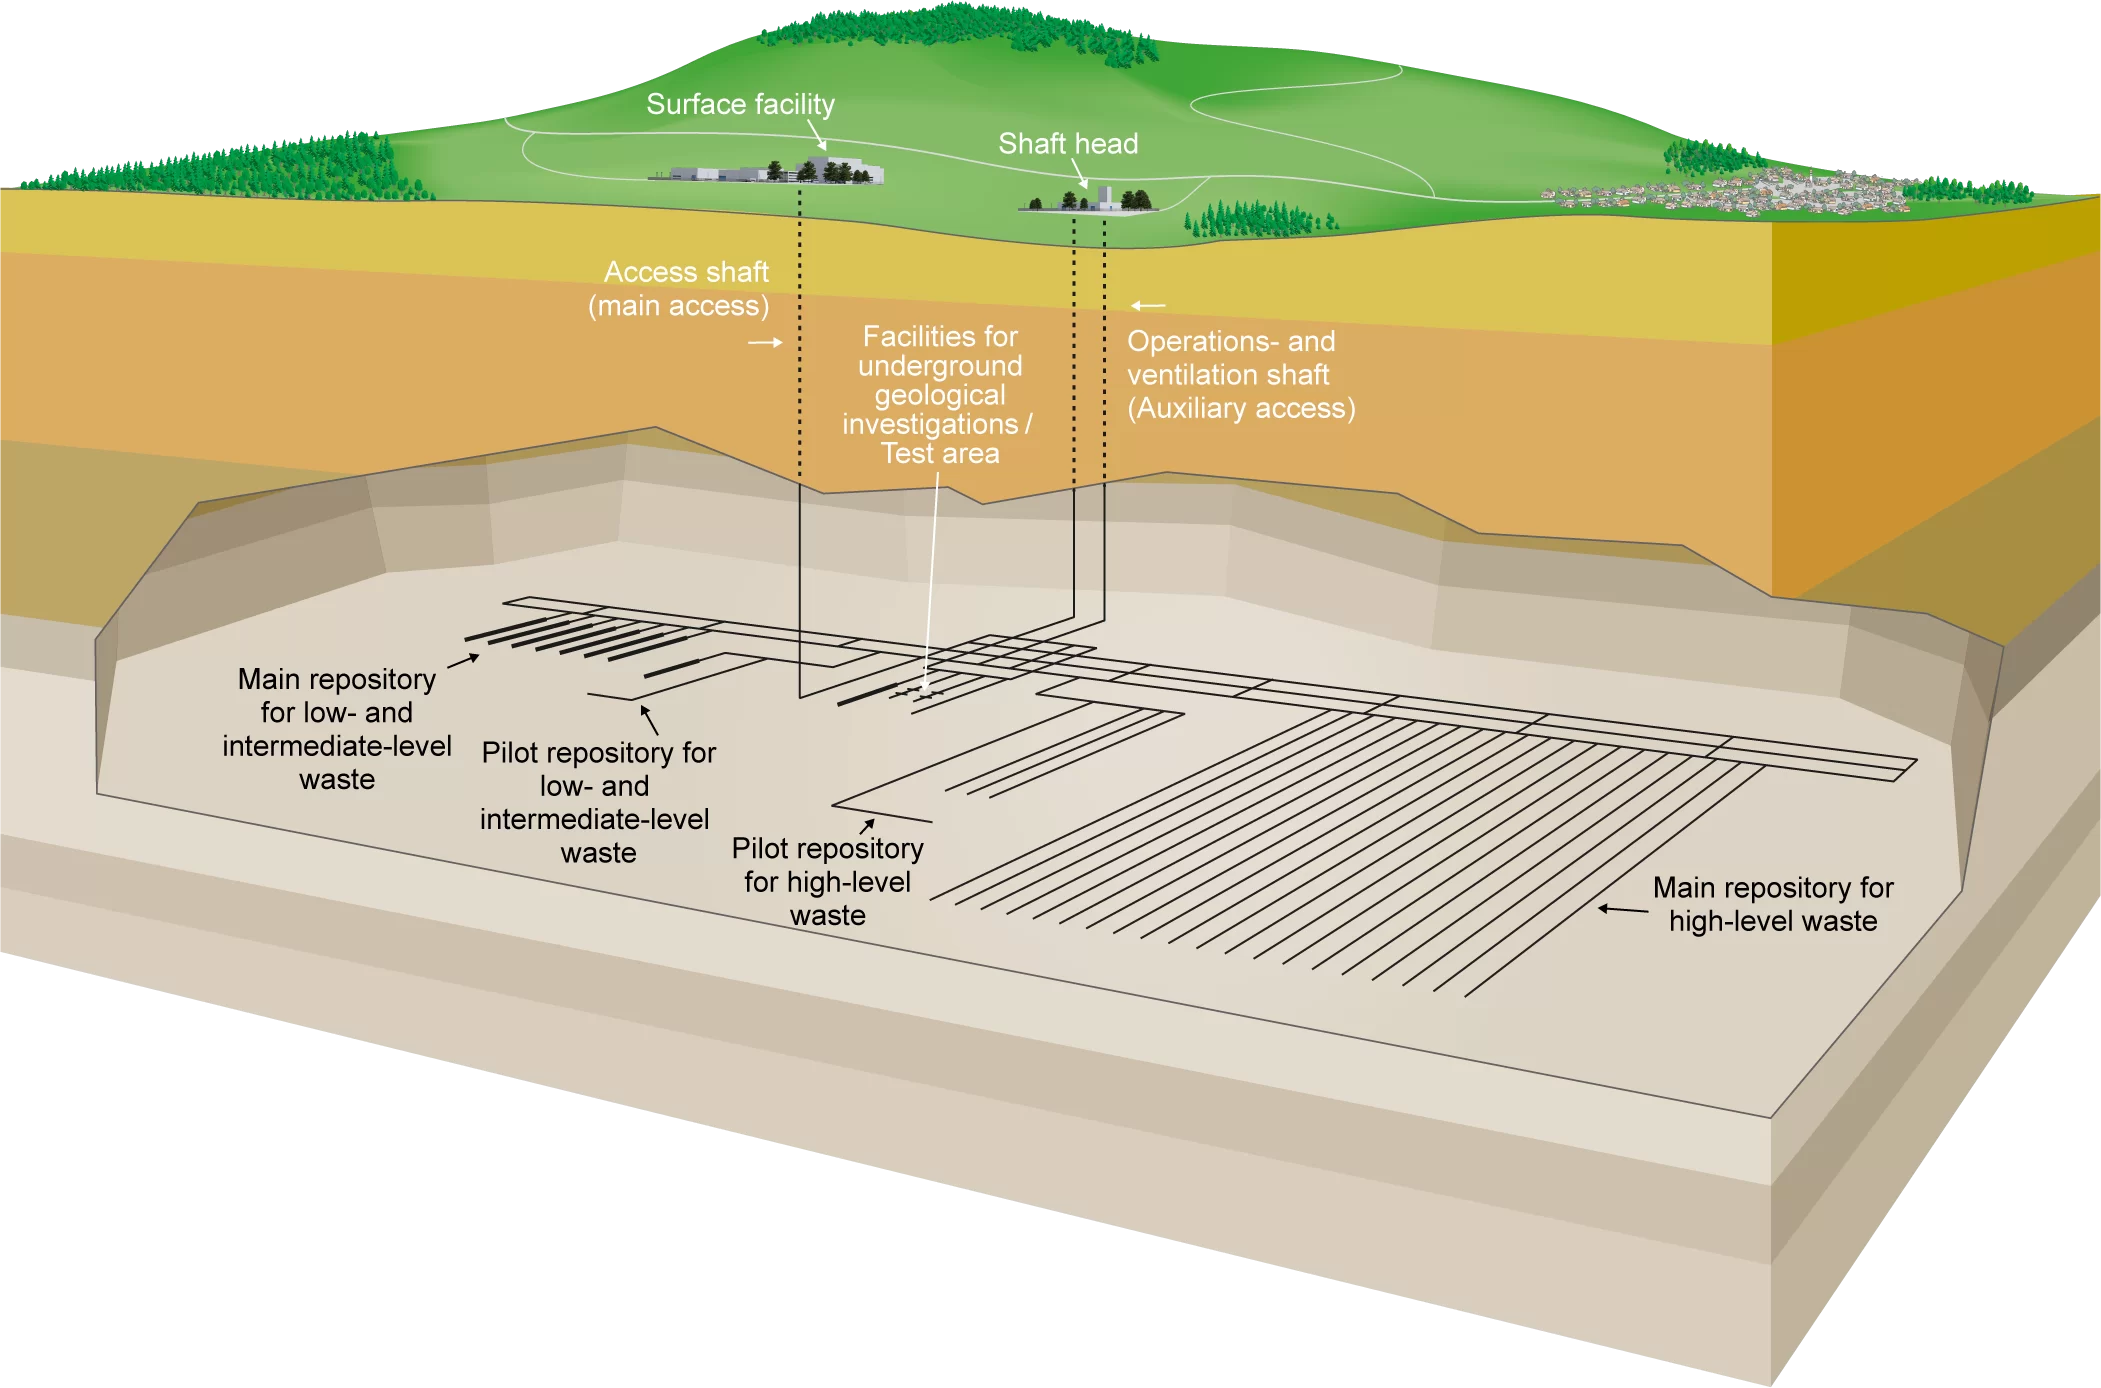 Diagram of a deep geological repository for low- and intermediate-level waste as well as high-level waste (combined repository). In this example, the access structures are designed as shafts. Source: Nagra